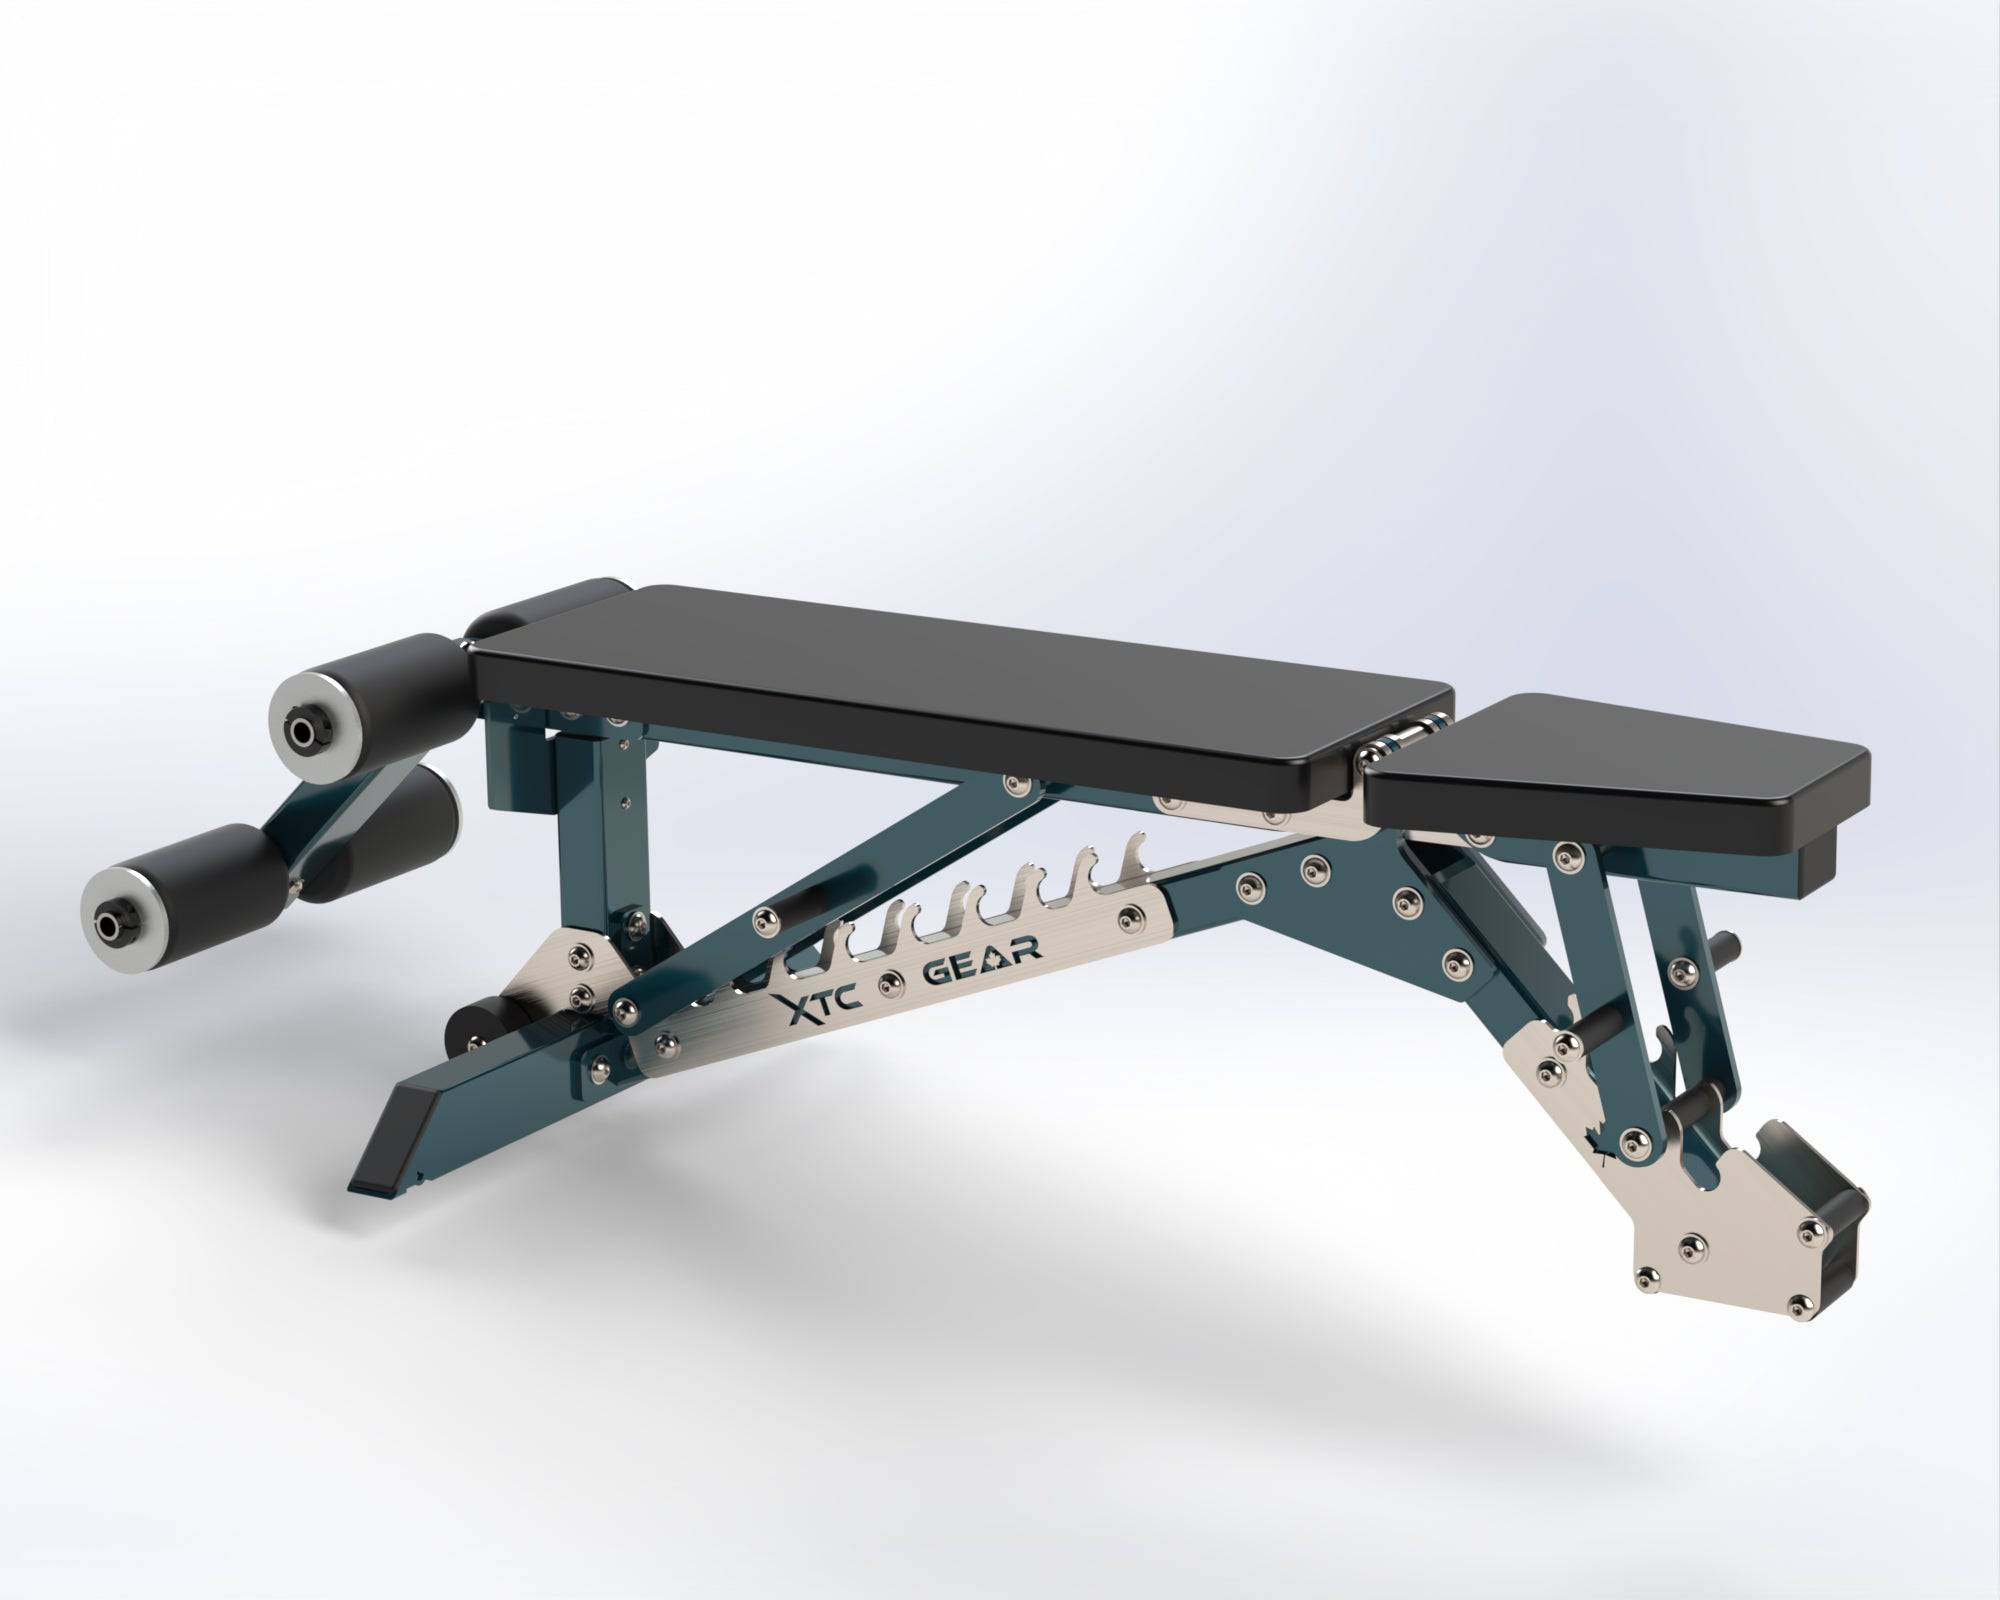 XTC Gear | X-Series Super Bench Attachment - Decline - XTC Fitness - Exercise Equipment Superstore - Canada - Bench Accessory